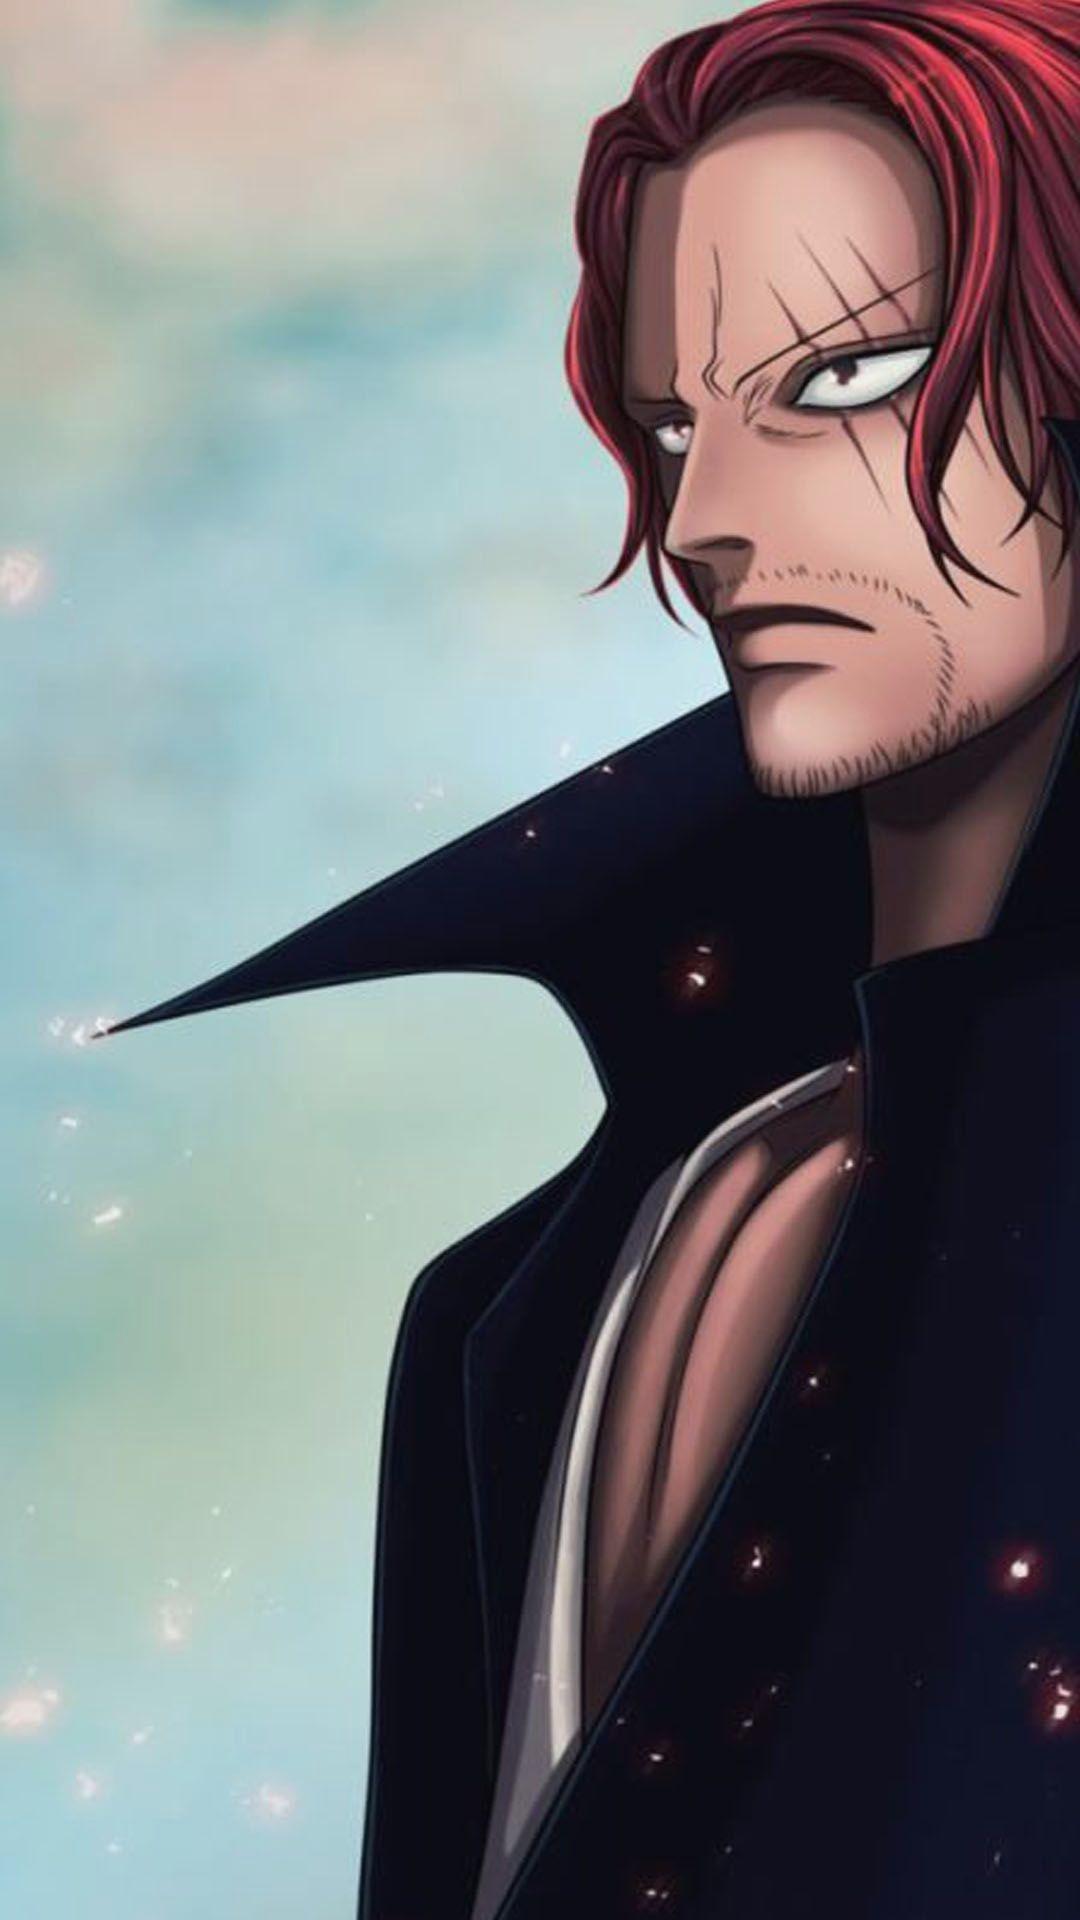 1080 x 1920 · jpeg - One Piece Yonkou Android Wallpapers - Wallpaper Cave